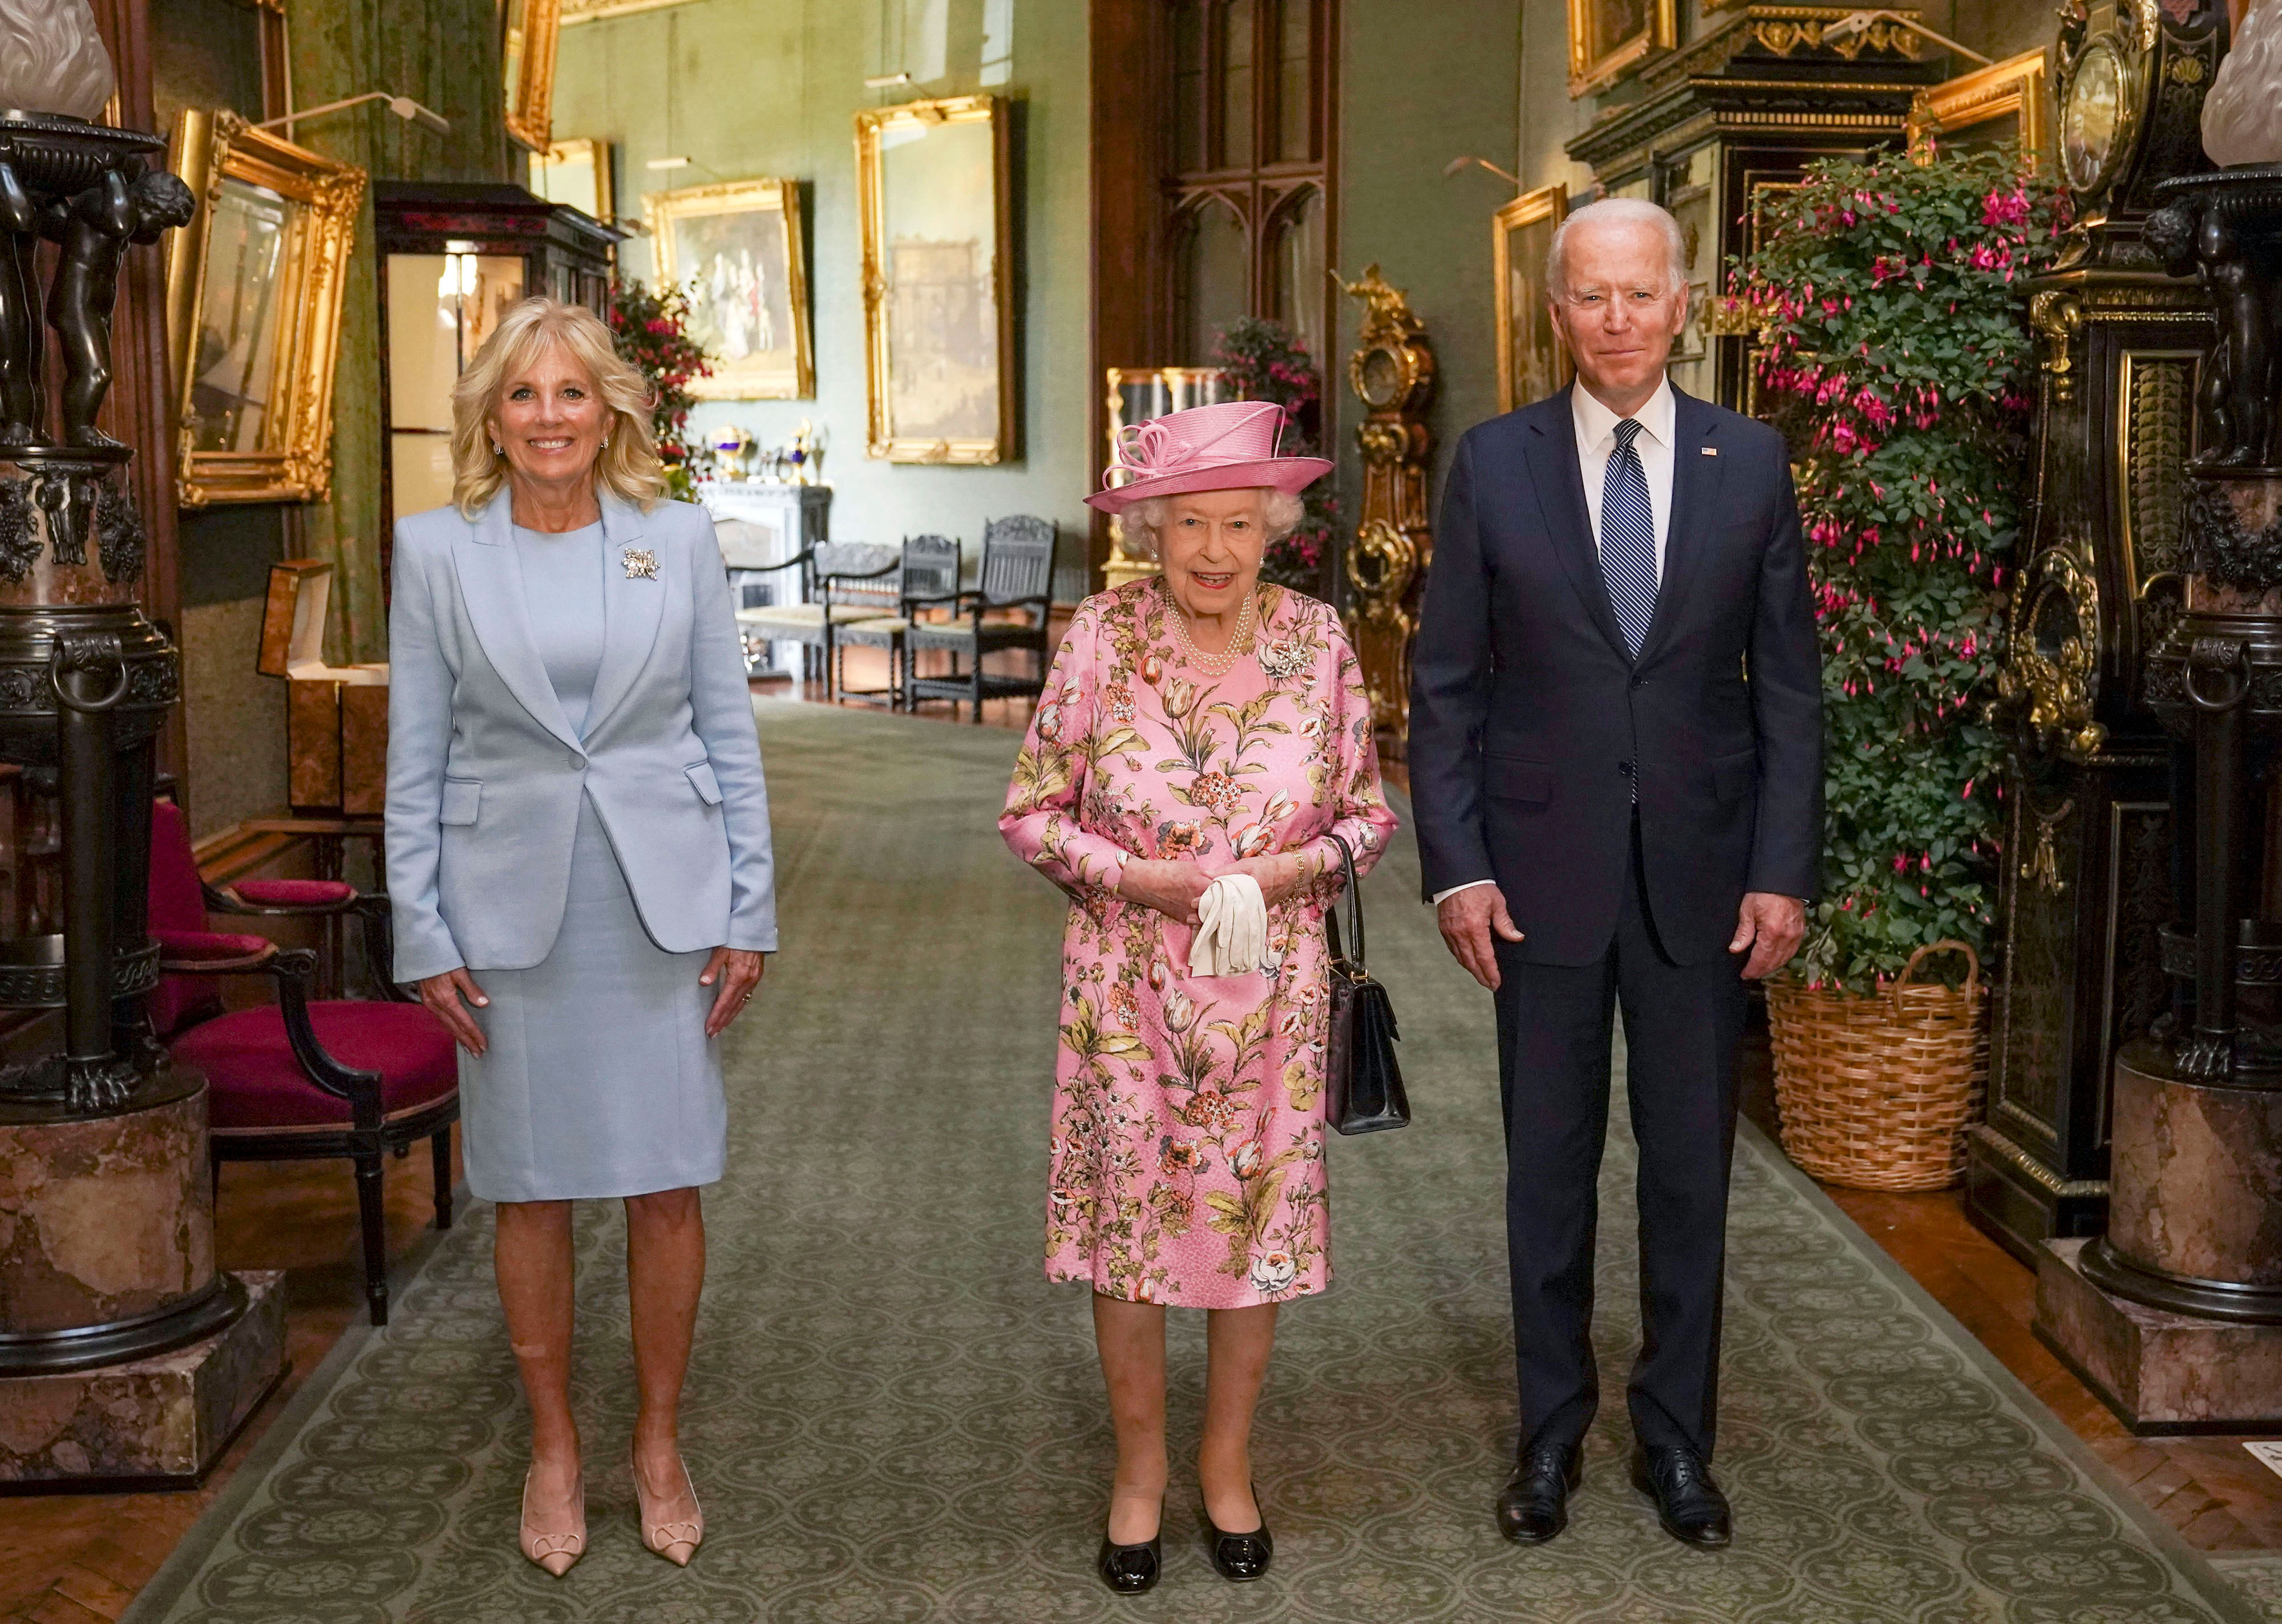 Queen Elizabeth II stands for a photo with US President Joe Biden and first lady Jill Biden in the Grand Corridor during their visit to Windsor Castle in England on June 13.